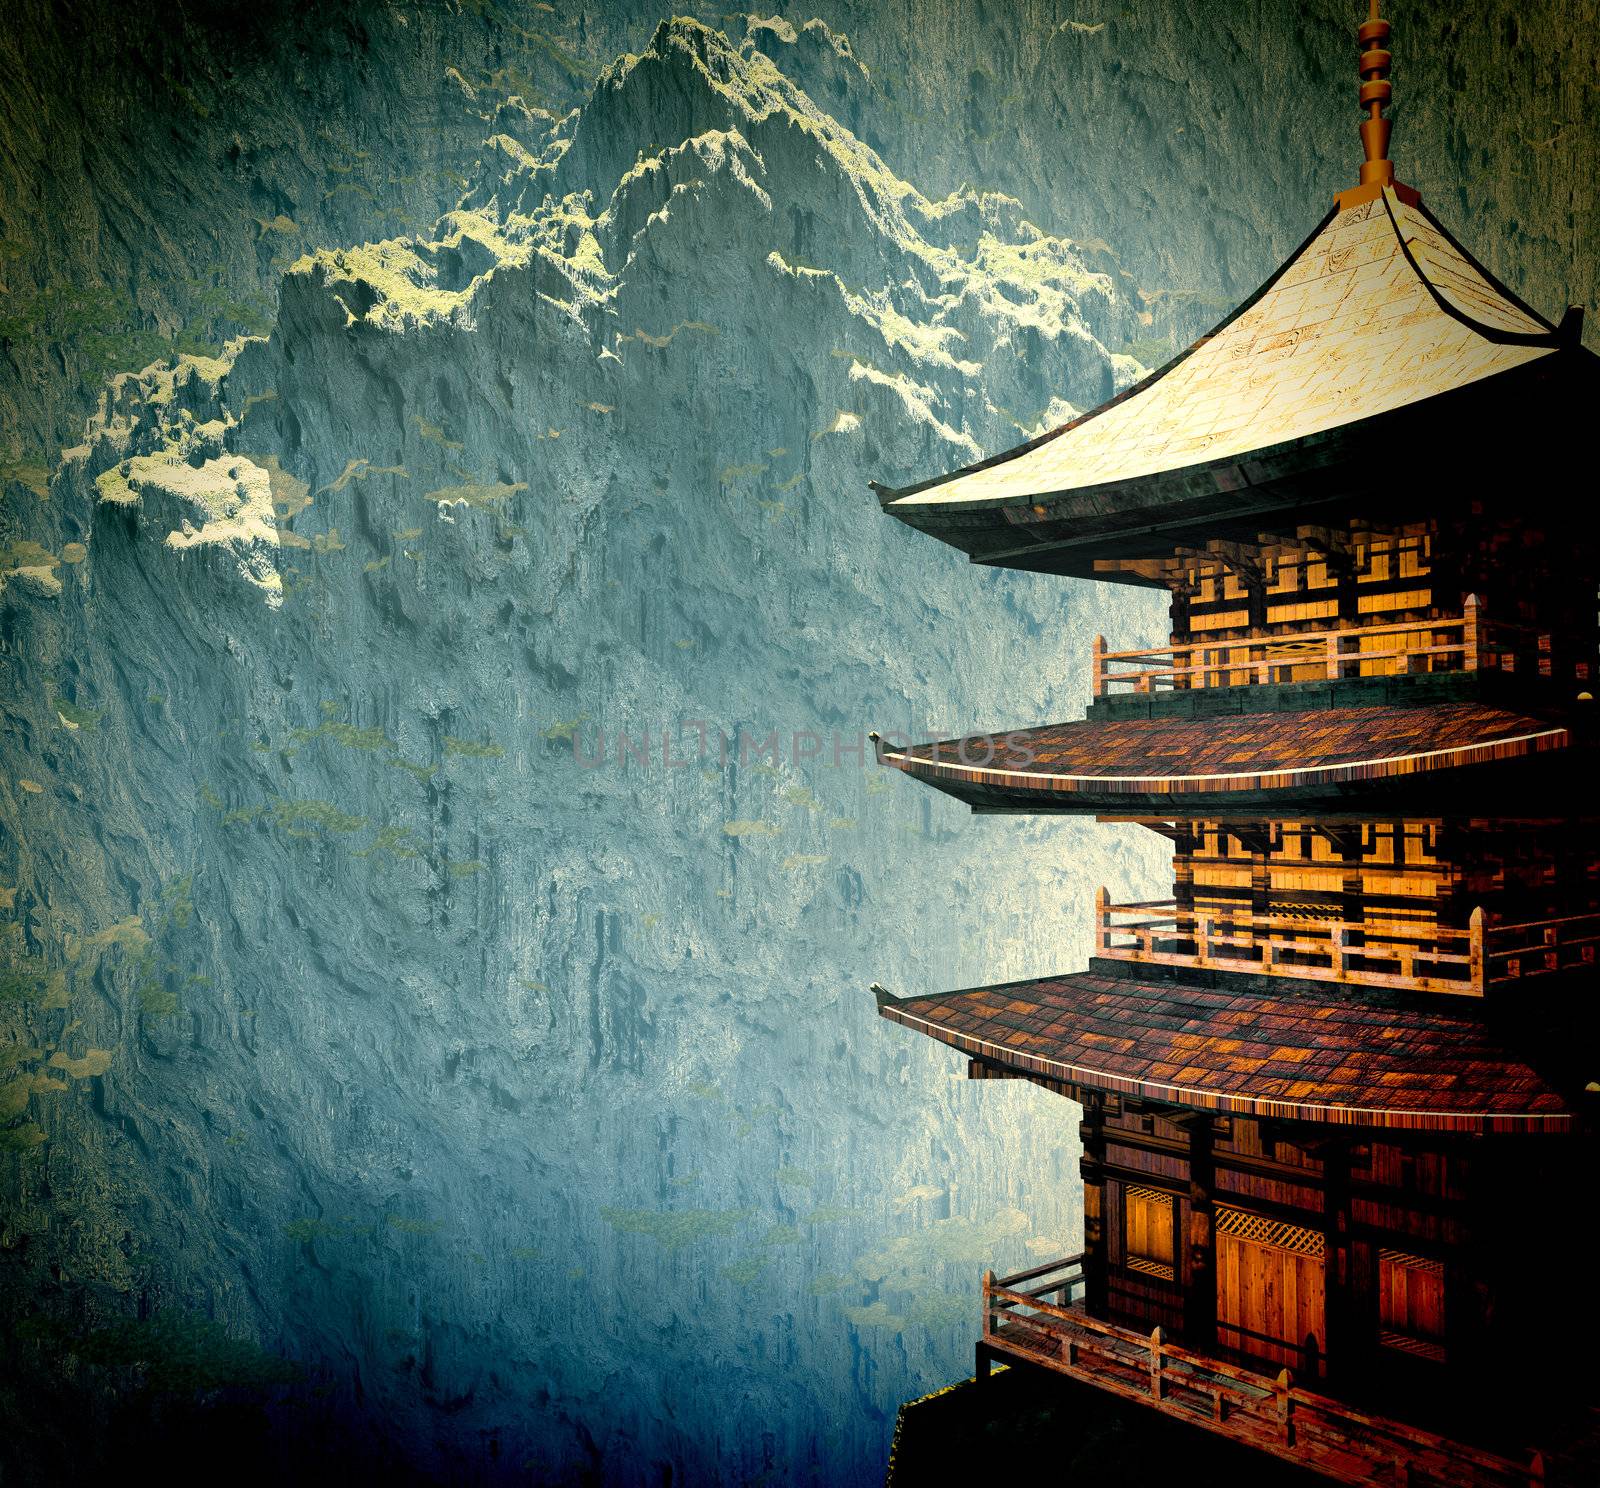 Zen buddhist temple in the mountains by andromeda13